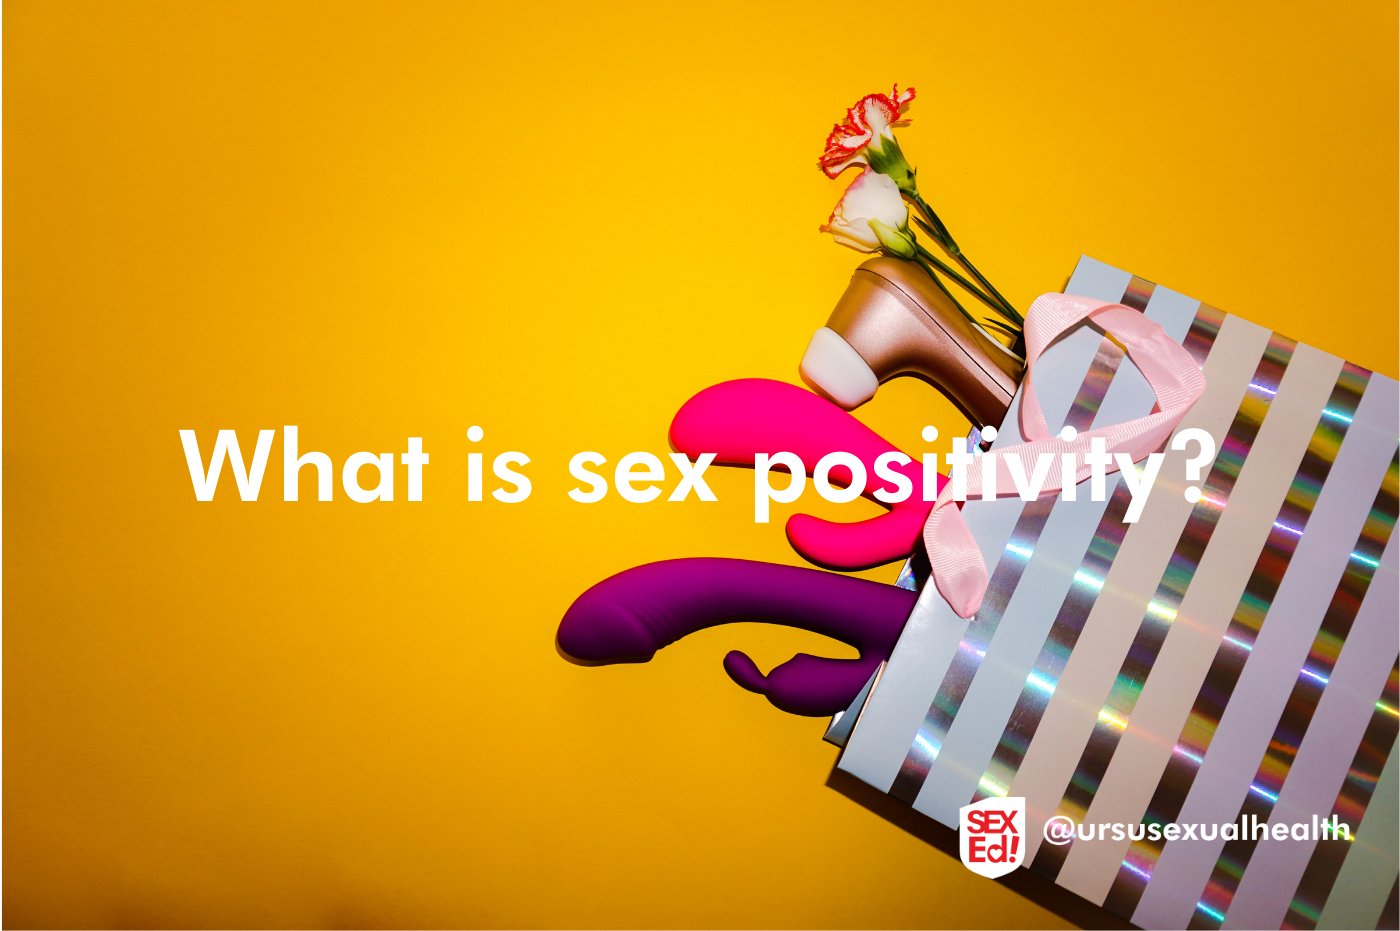 A basket of sex toys spills out on to a yellow background with text that reads "What is sex positivity?"